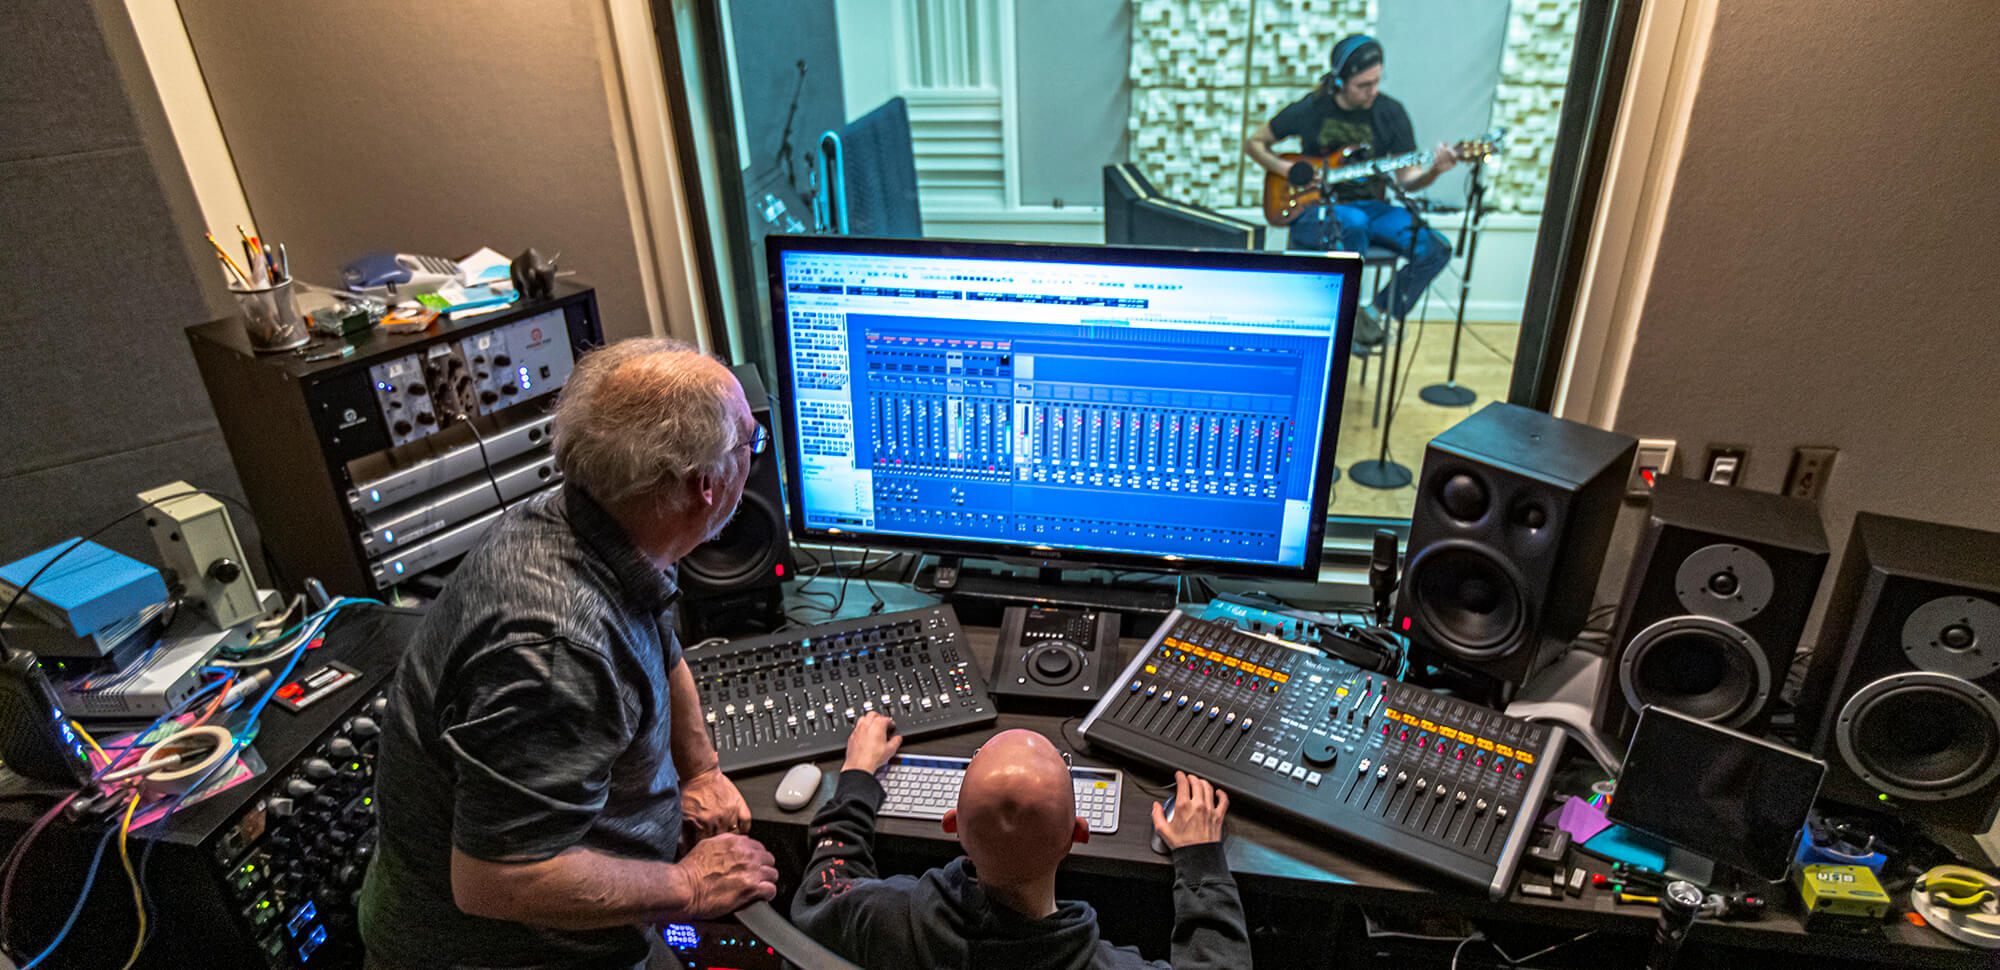 An instructor oversees a student working at a mixing board while anther student plays the guitar in a practice room.